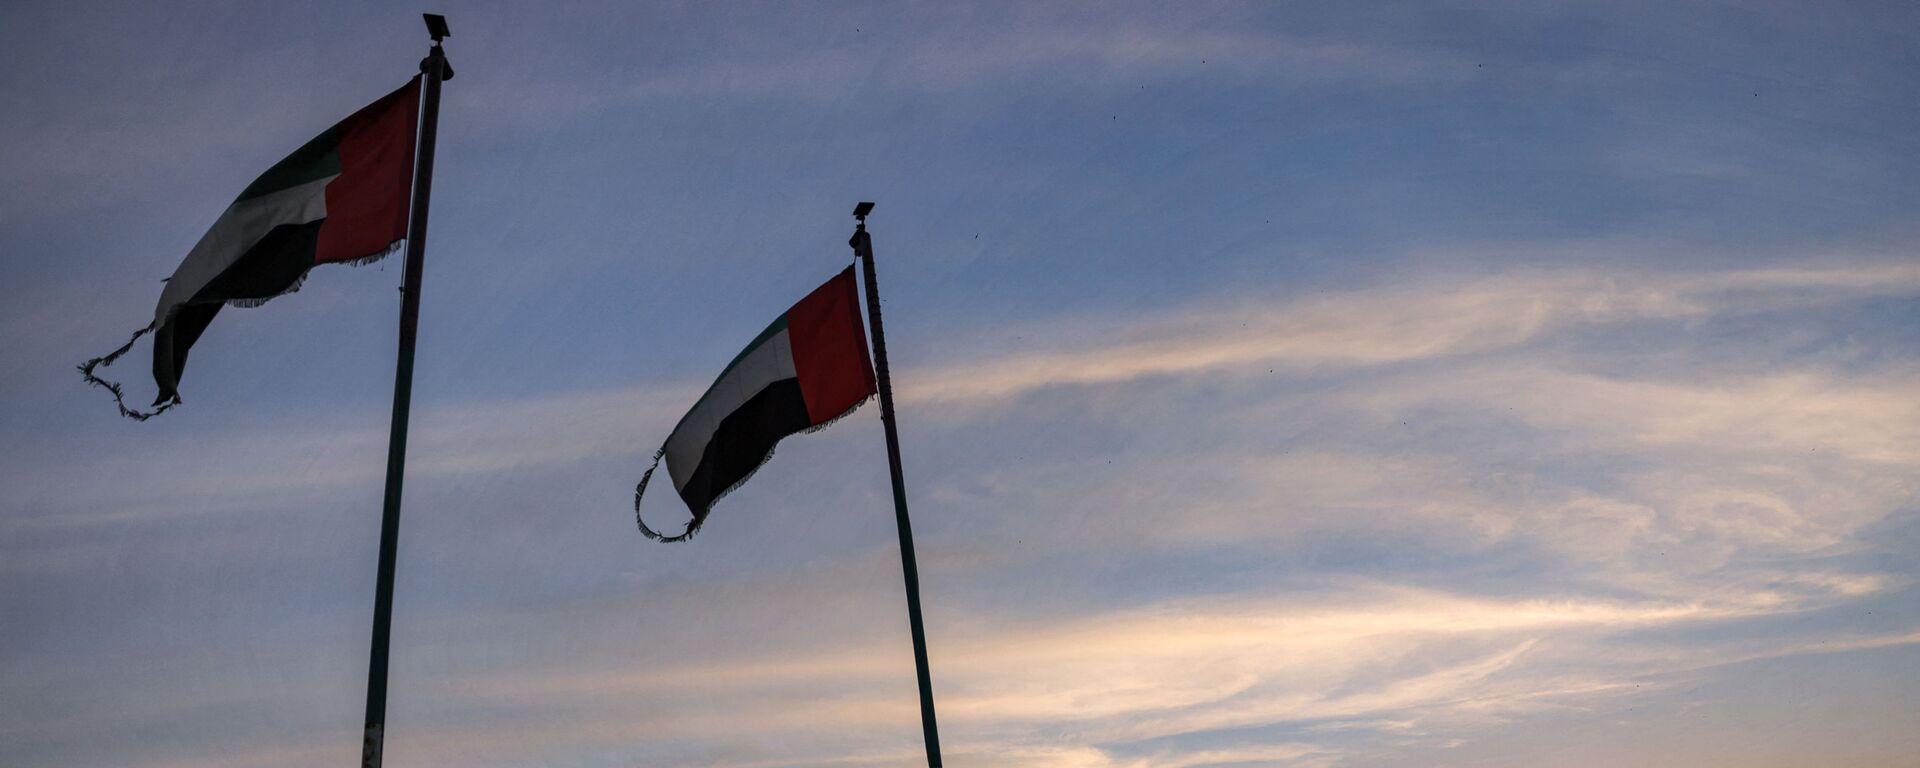 This picture taken on May 2, 2021 shows Emirati flags flying by boats moored along the Dubai creek at sunset. (Photo by GIUSEPPE CACACE / AFP) - Sputnik International, 1920, 18.05.2021